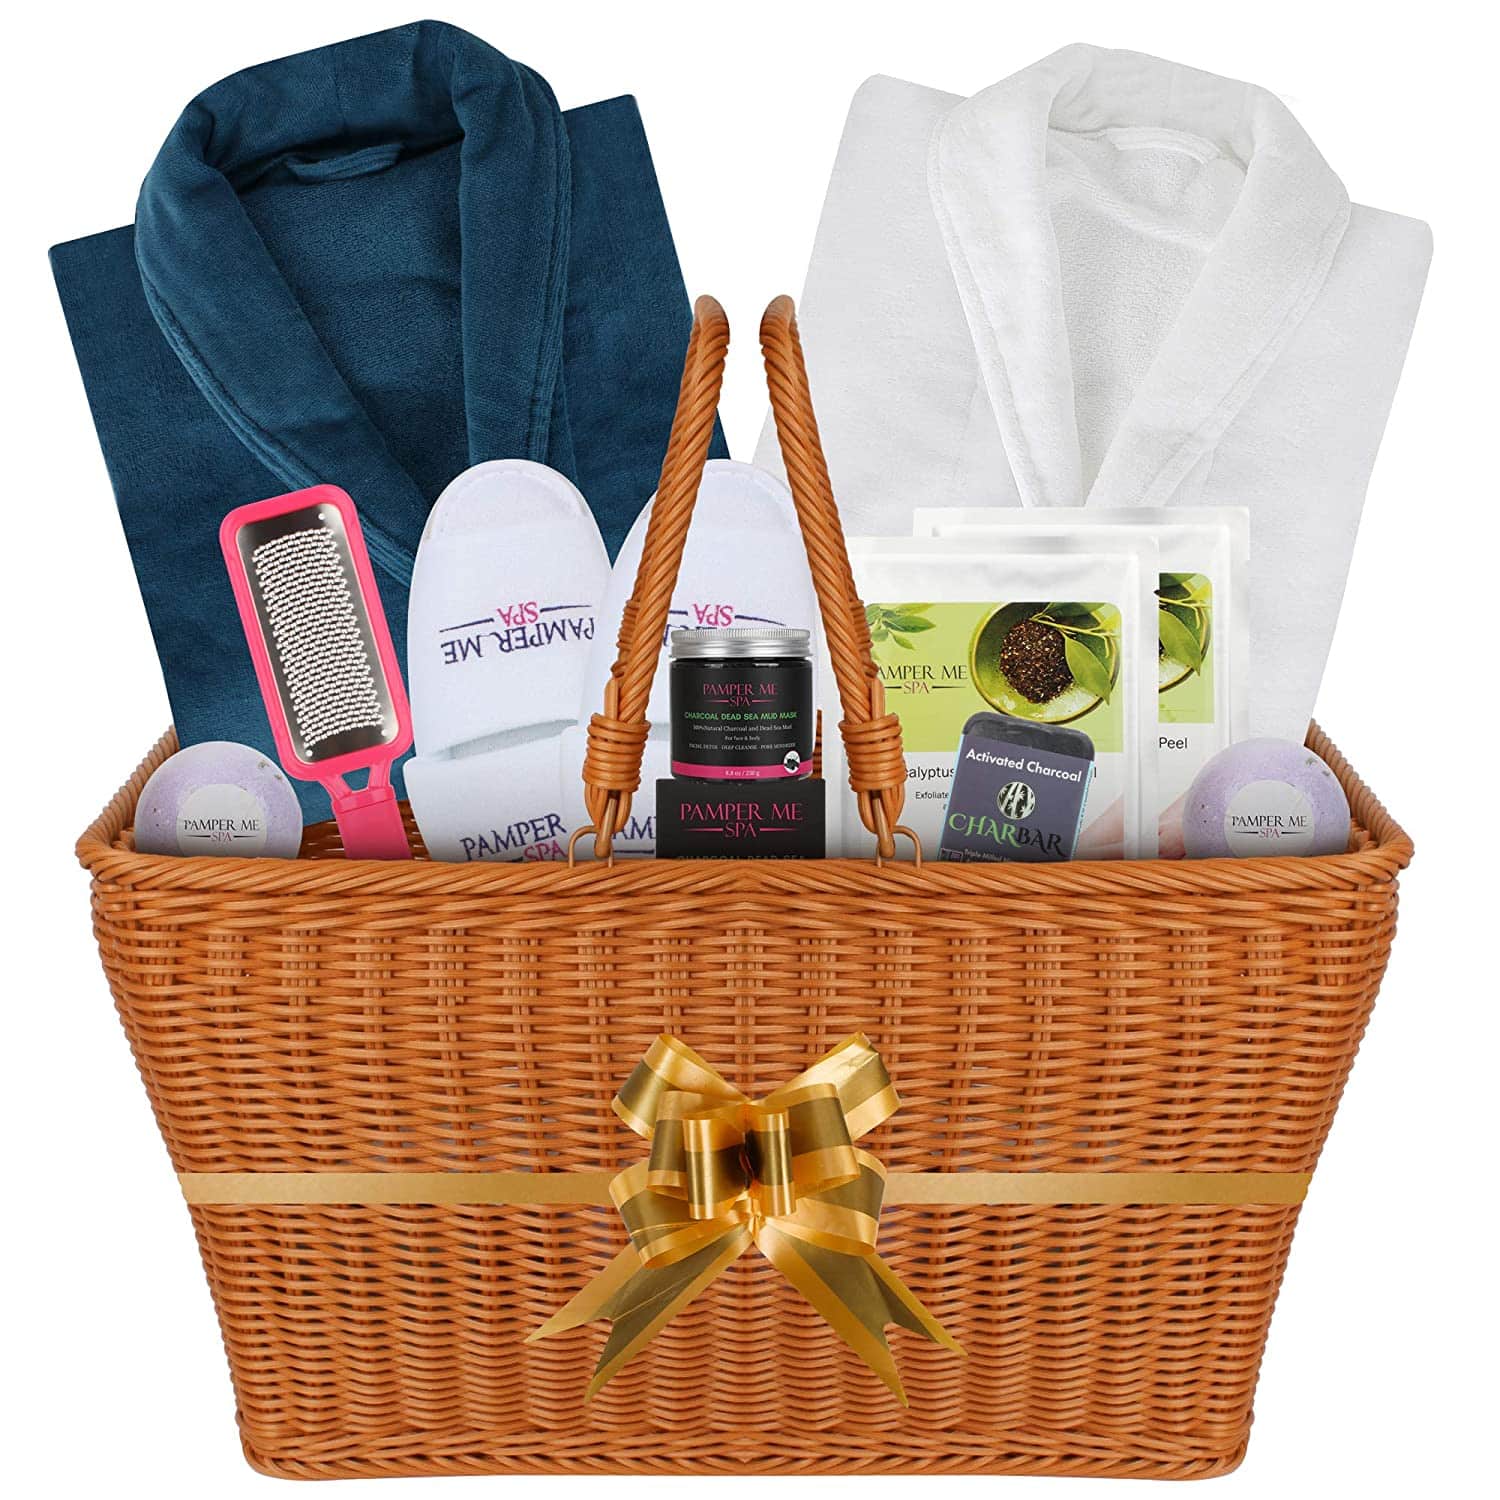 The best gift hamper for girls and women - Spa Day with You - Mini